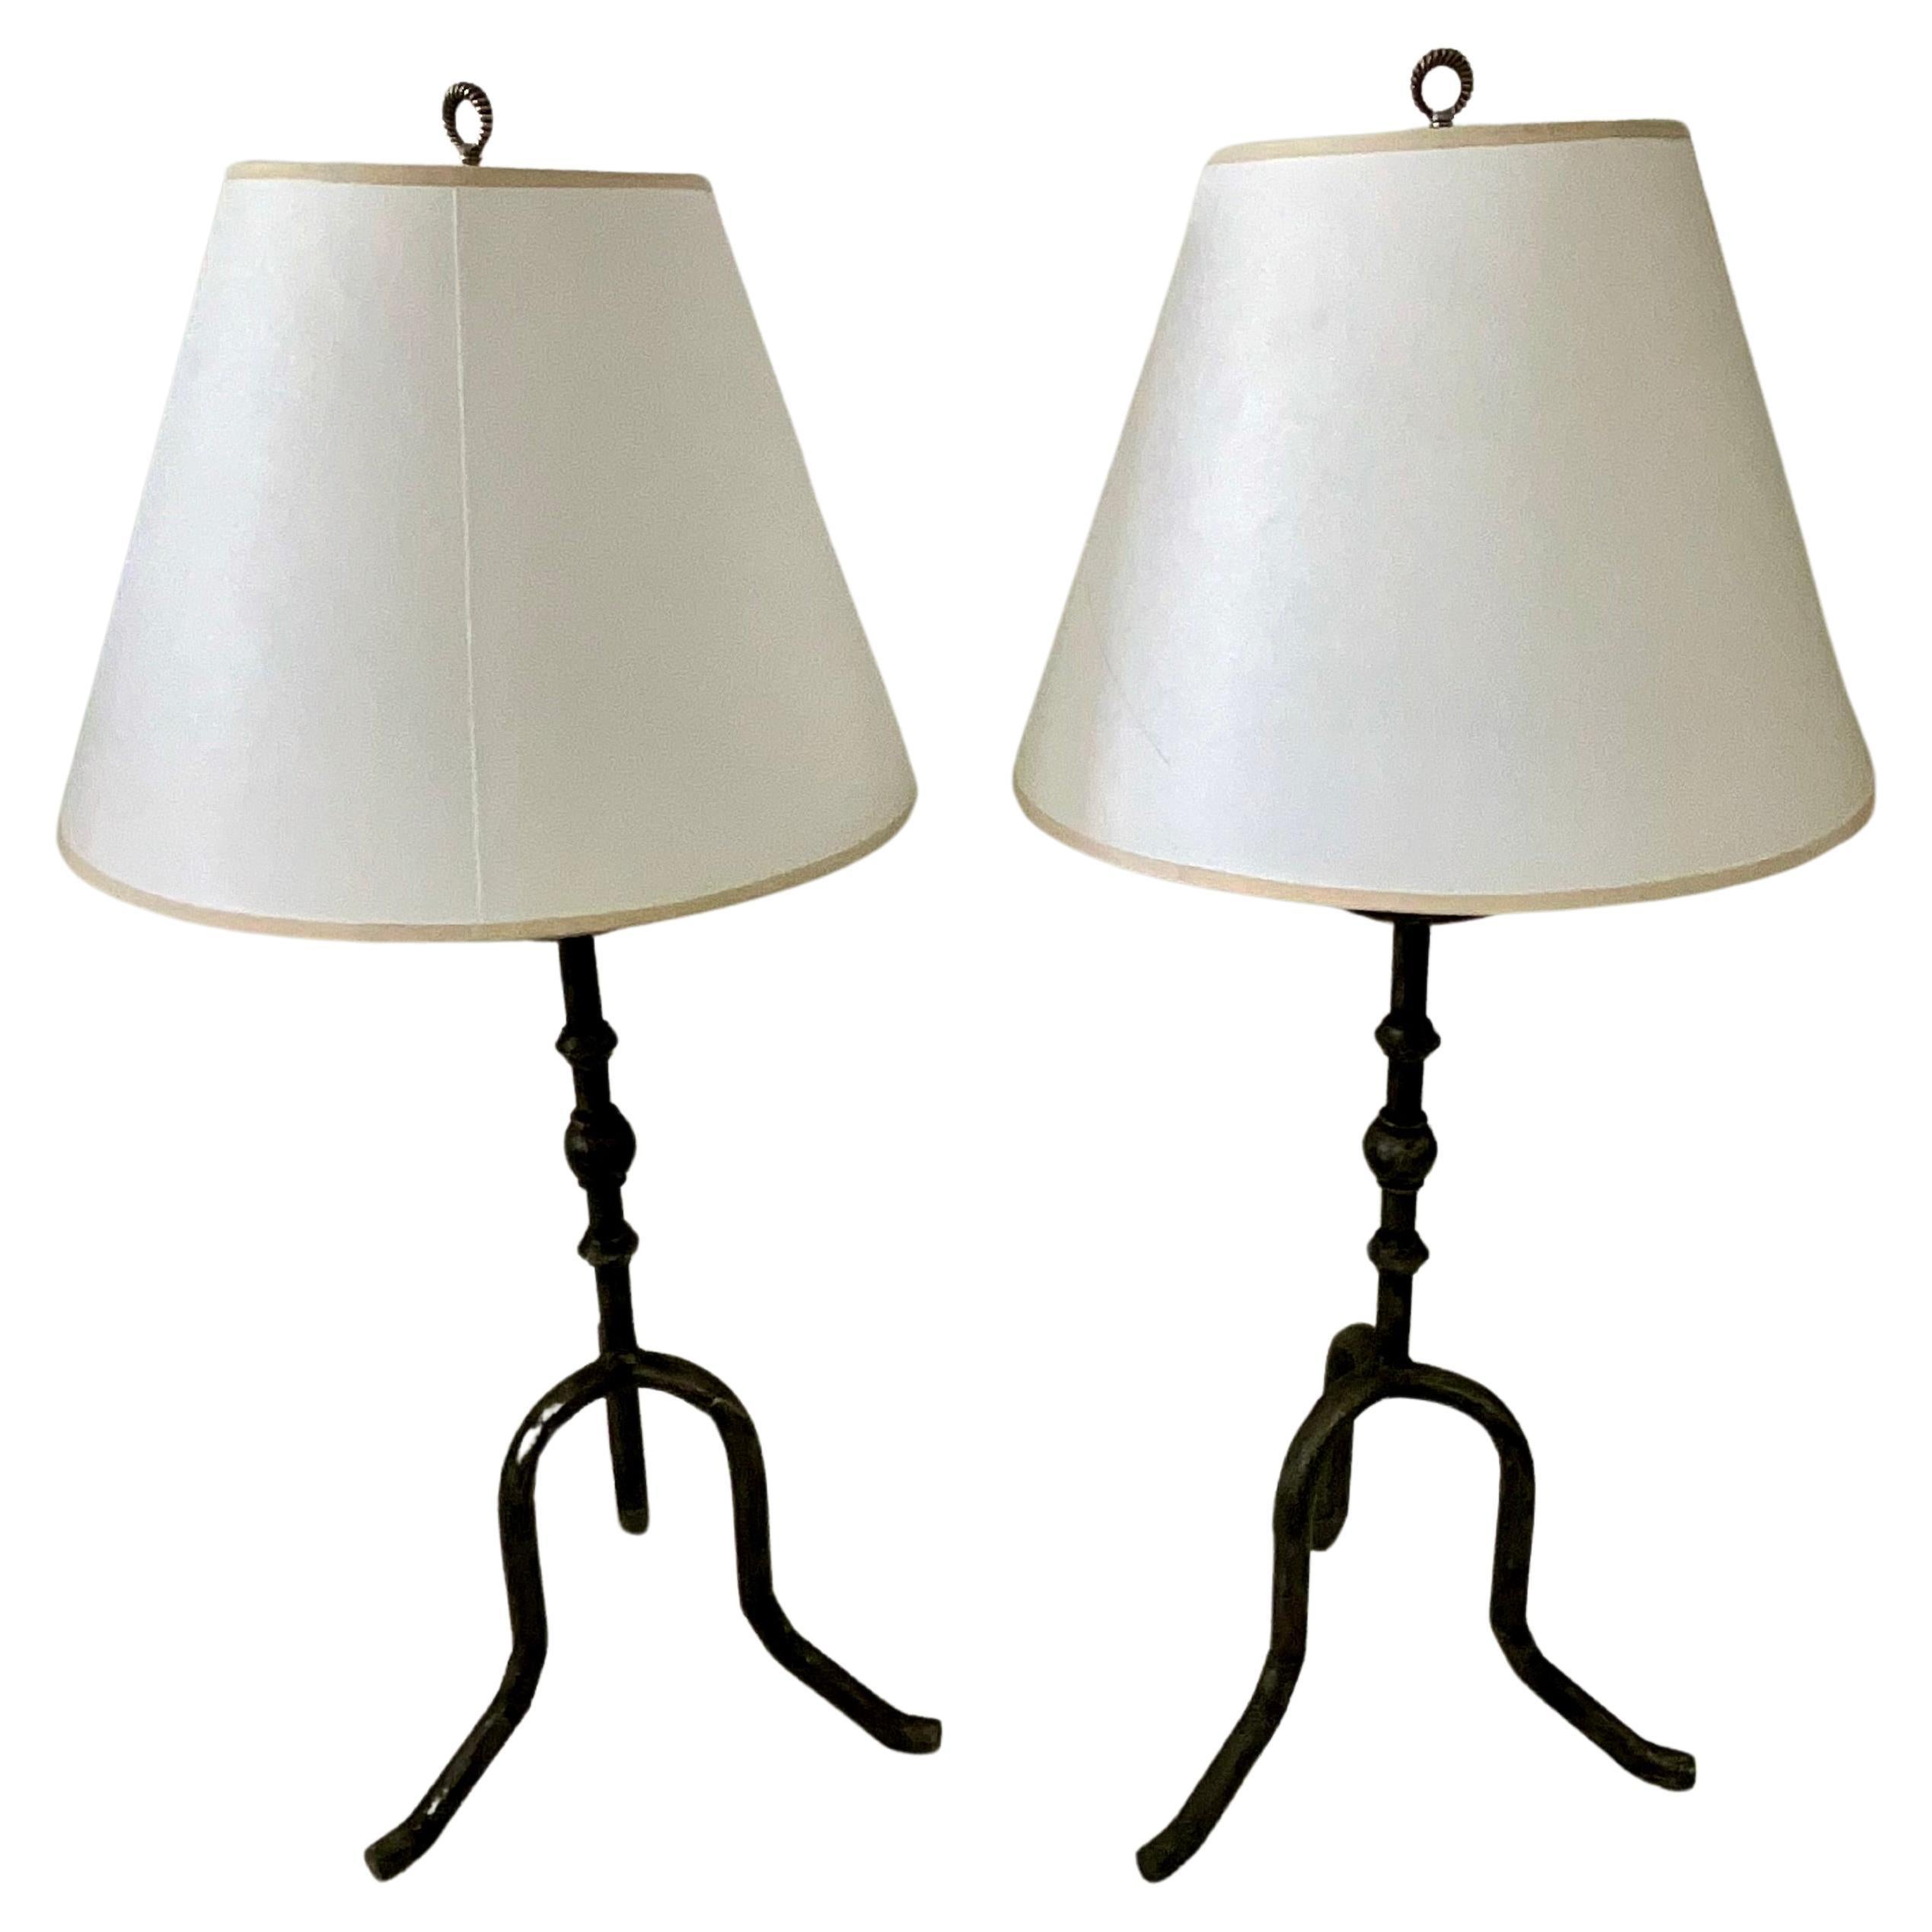 Pair of Decorative Silvered Metal  Candlestick Lamps